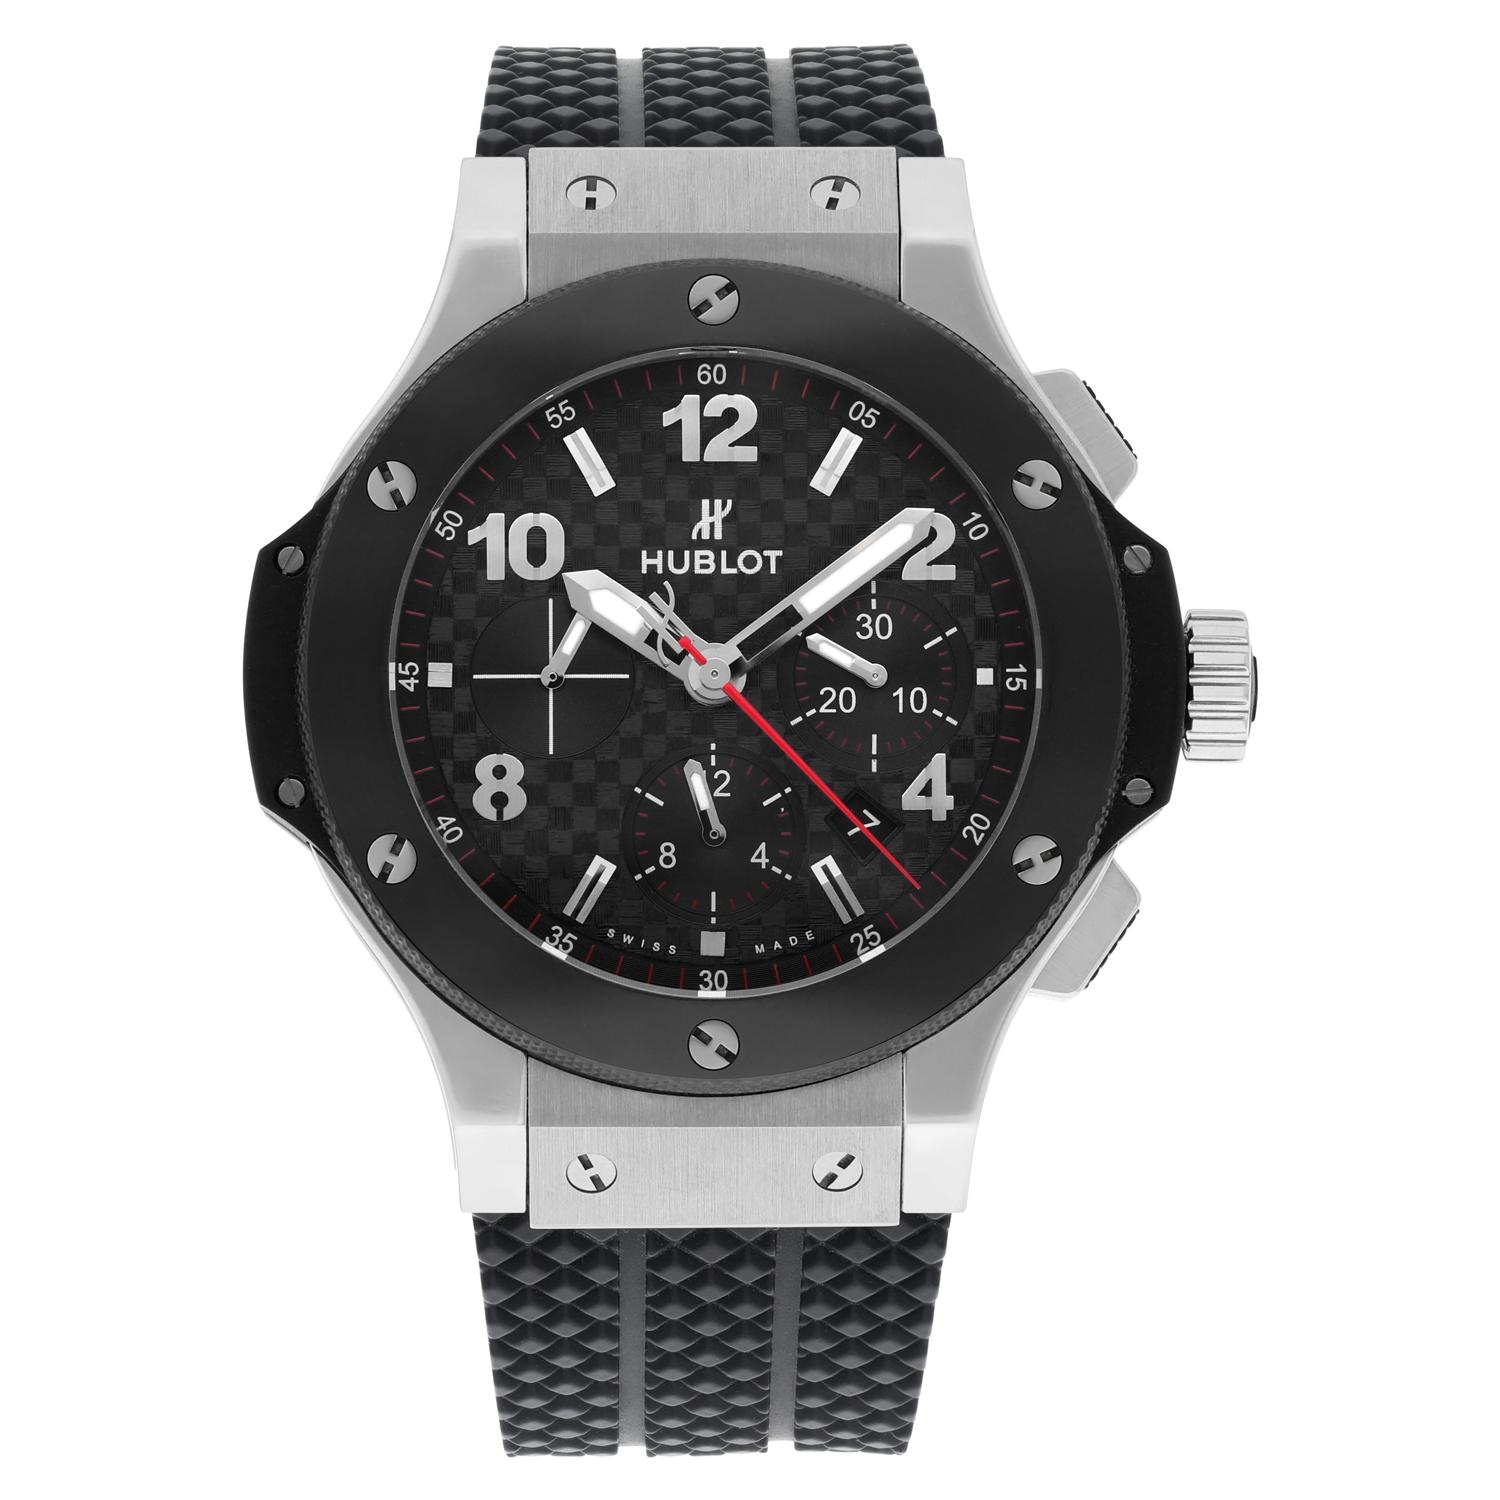 This Hublot Big Bang wristwatch is a stylish and functional accessory for any man. With a 44mm round stainless steel case and polished finish, the watch has a sleek and modern look. The black carbon fiber dial features both Arabic numerals and baton